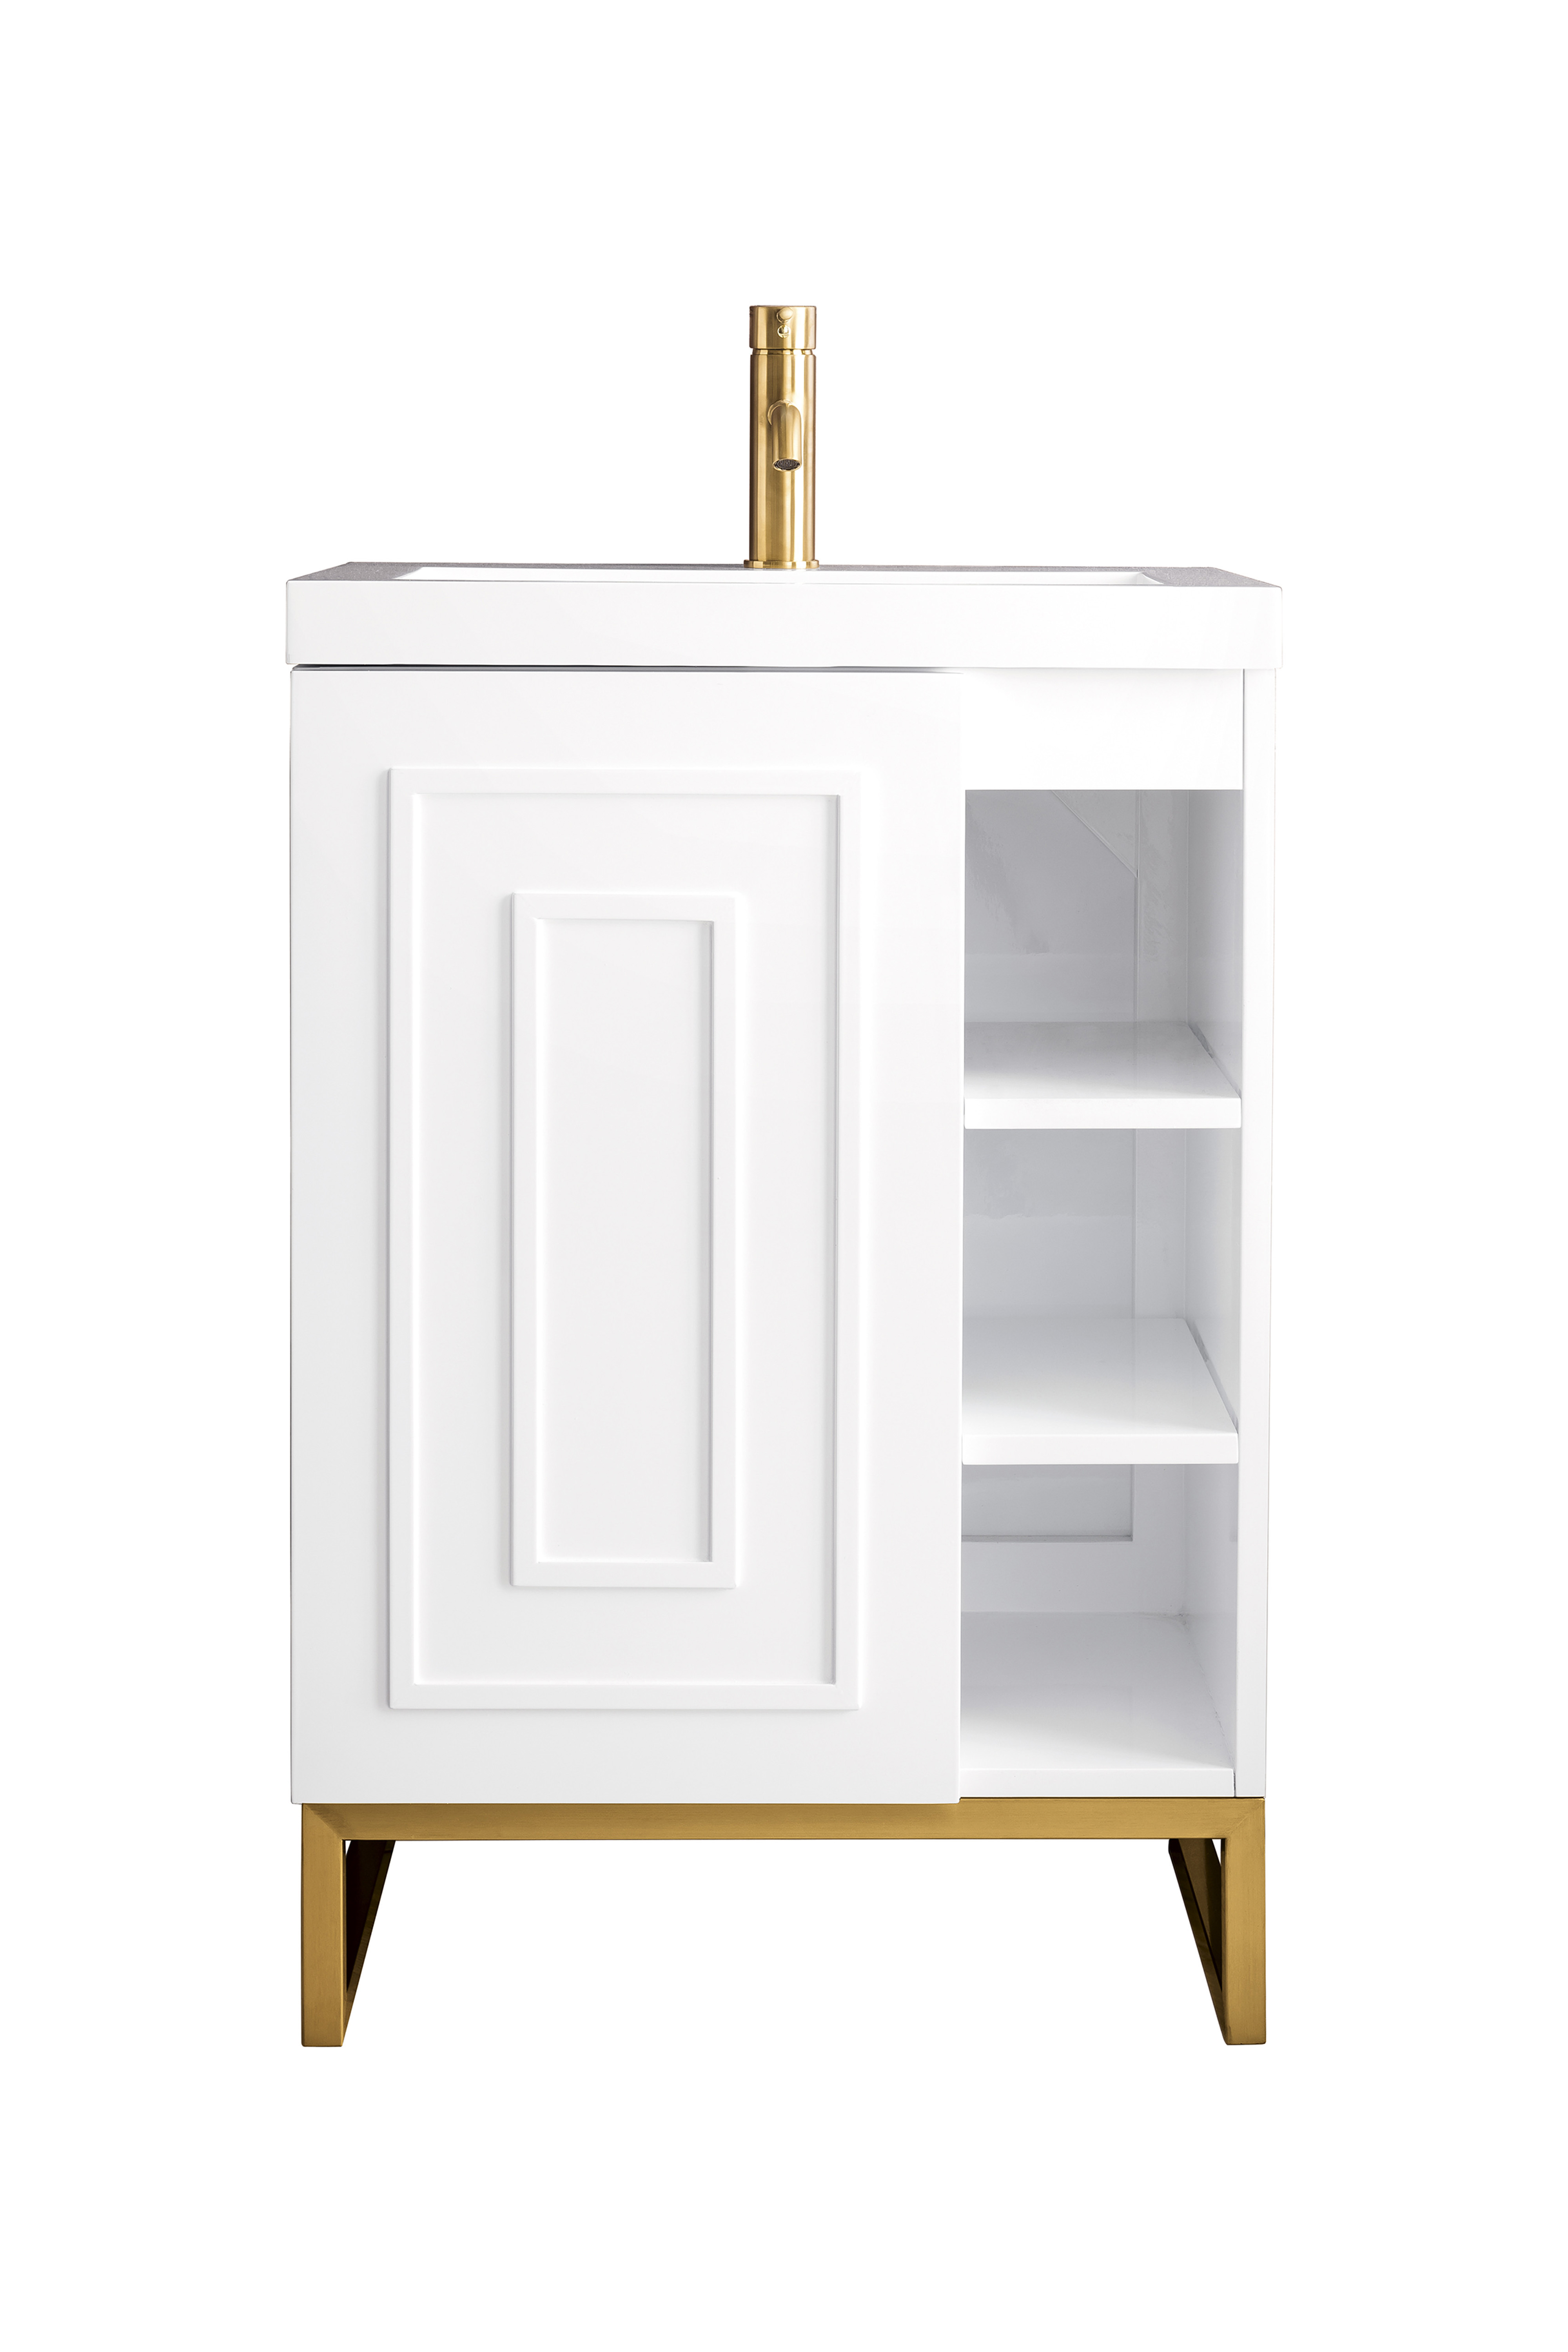 James Martin E110V24GWRGDWG Alicante' 24" Single Vanity Cabinet, Glossy White, Radiant Gold w/White Glossy Composite Countertop